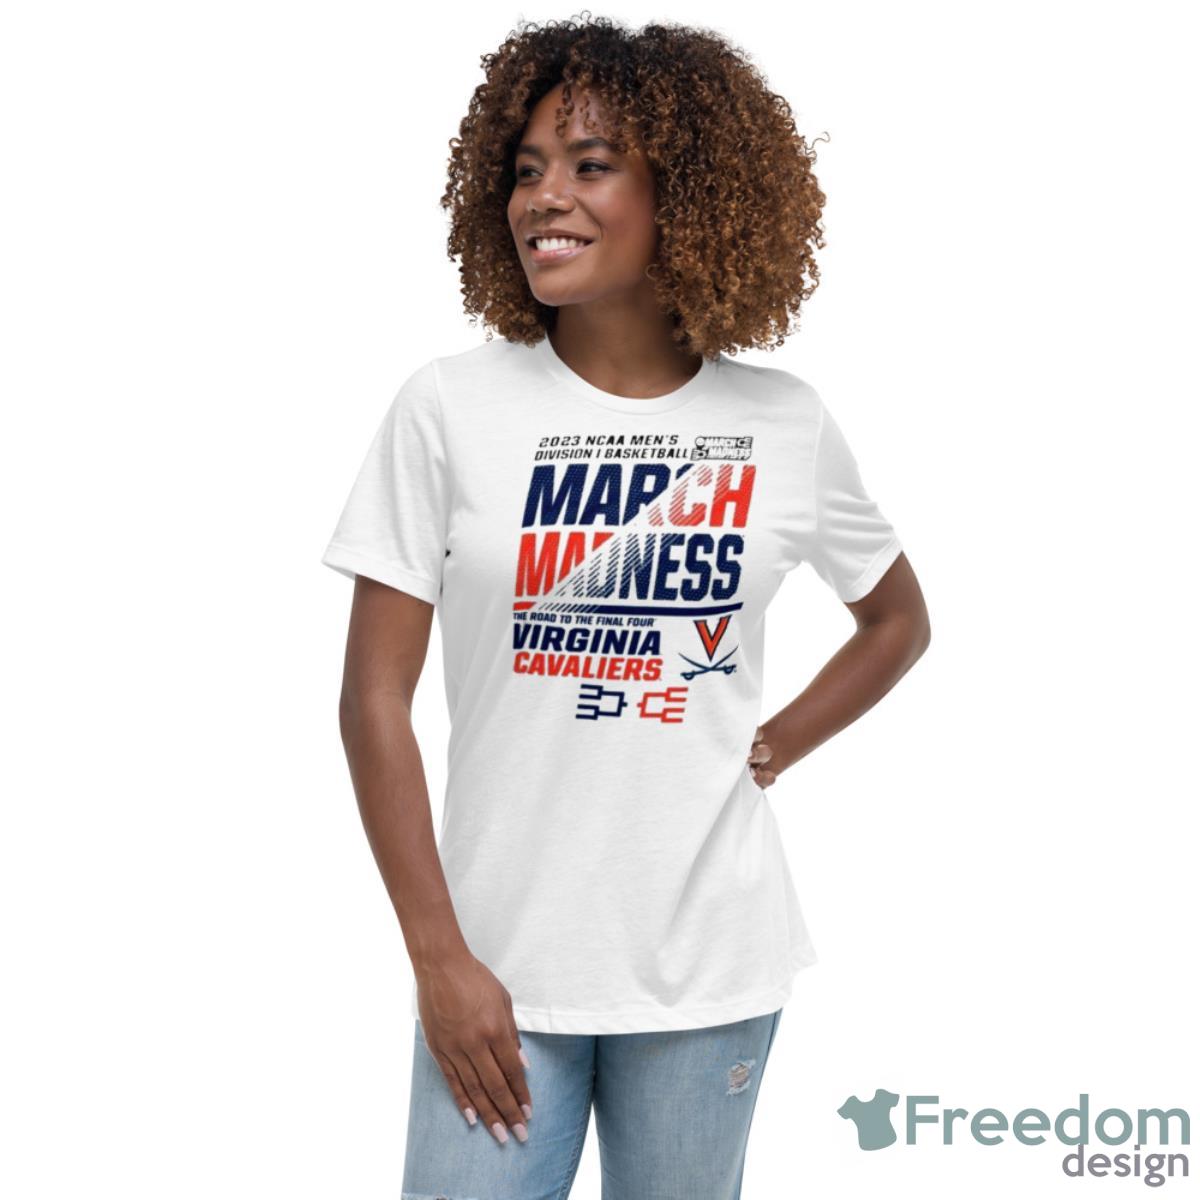 Virginia Cavaliers Men’s Basketball 2023 NCAA March Madness The Road To Final Four Shirt